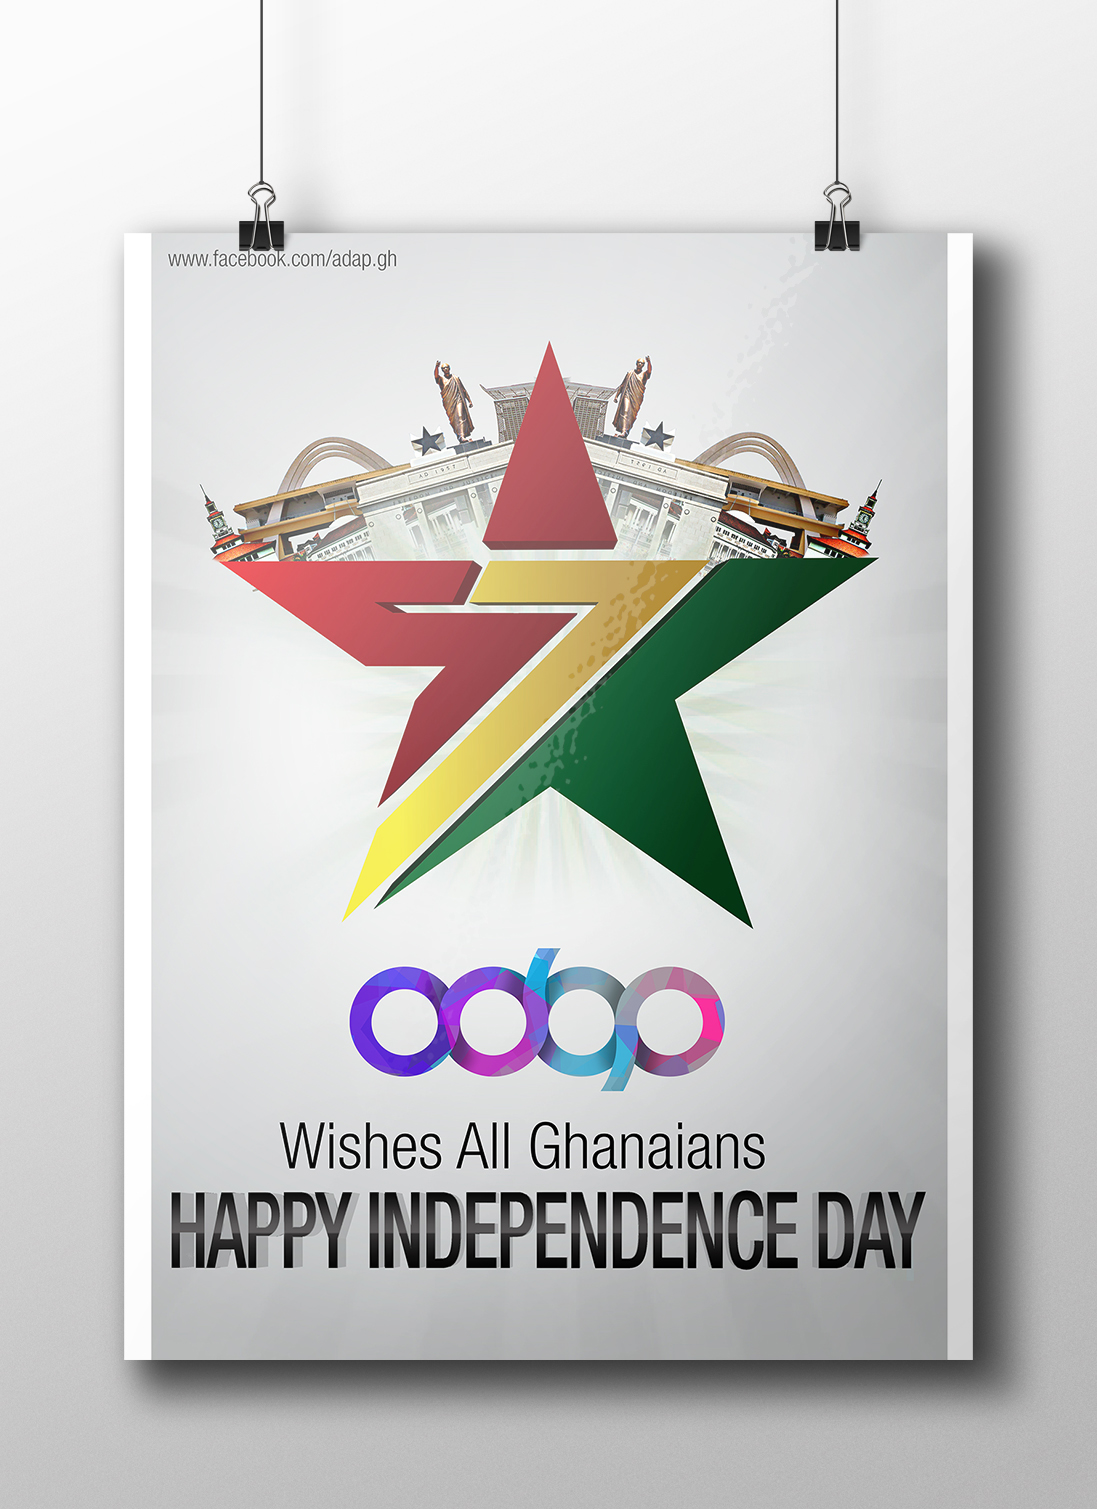 Ghana 57th Independence adap prince africa freedom adu march 6th march 6th